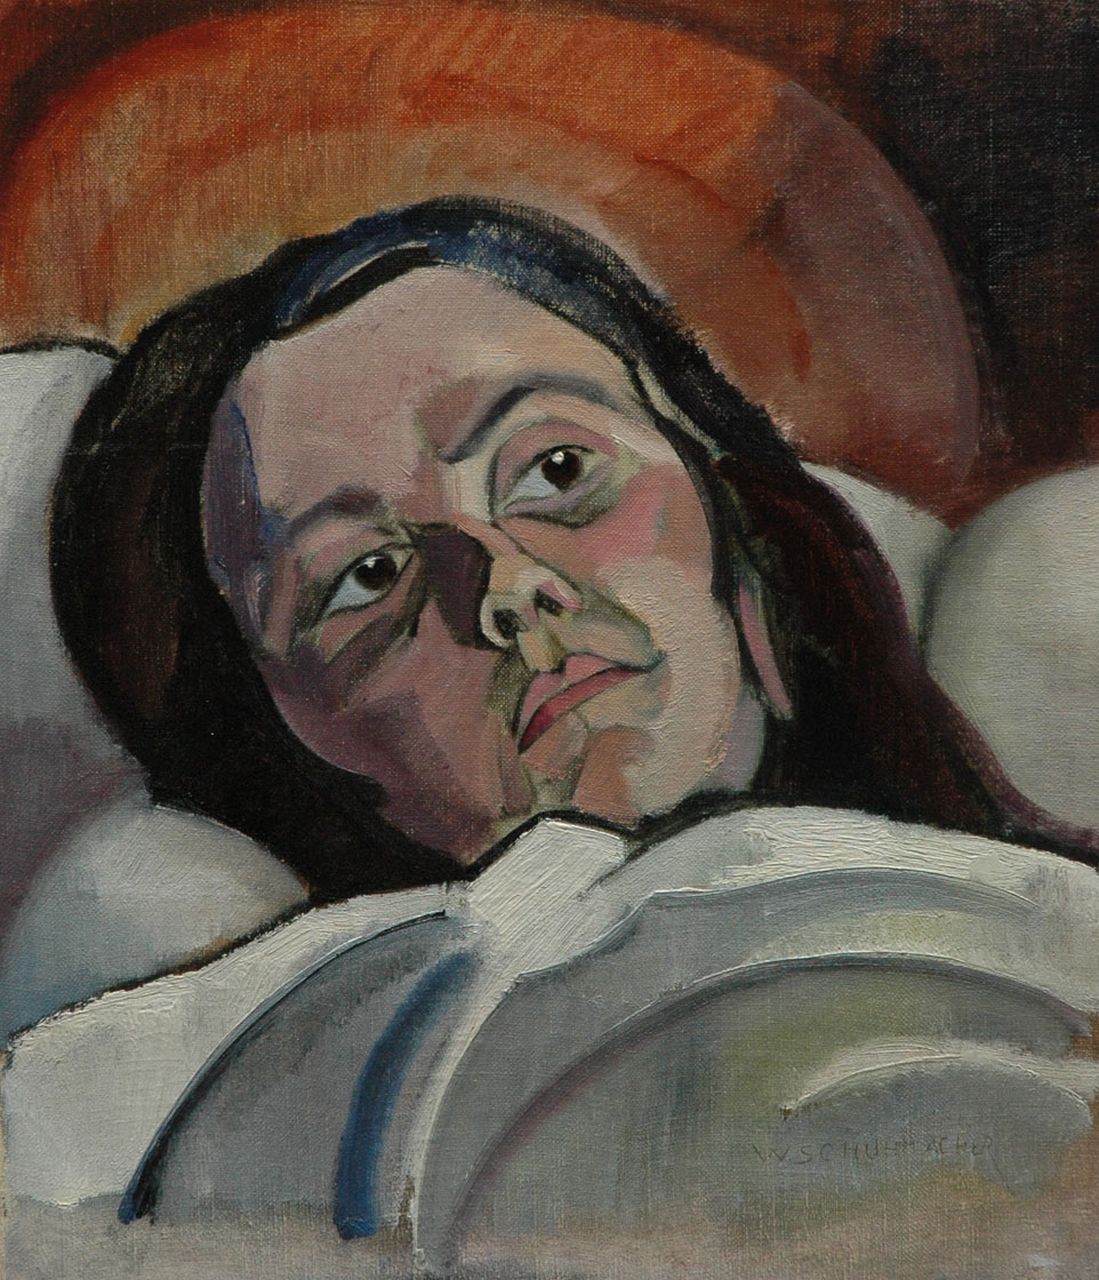 Schuhmacher W.G.C.  | Wijtze Gerrit Carel 'Wim' Schuhmacher, The painter's sister, oil on canvas laid down on board 46.4 x 40.2 cm, signed l.r. and executed ca. 1917